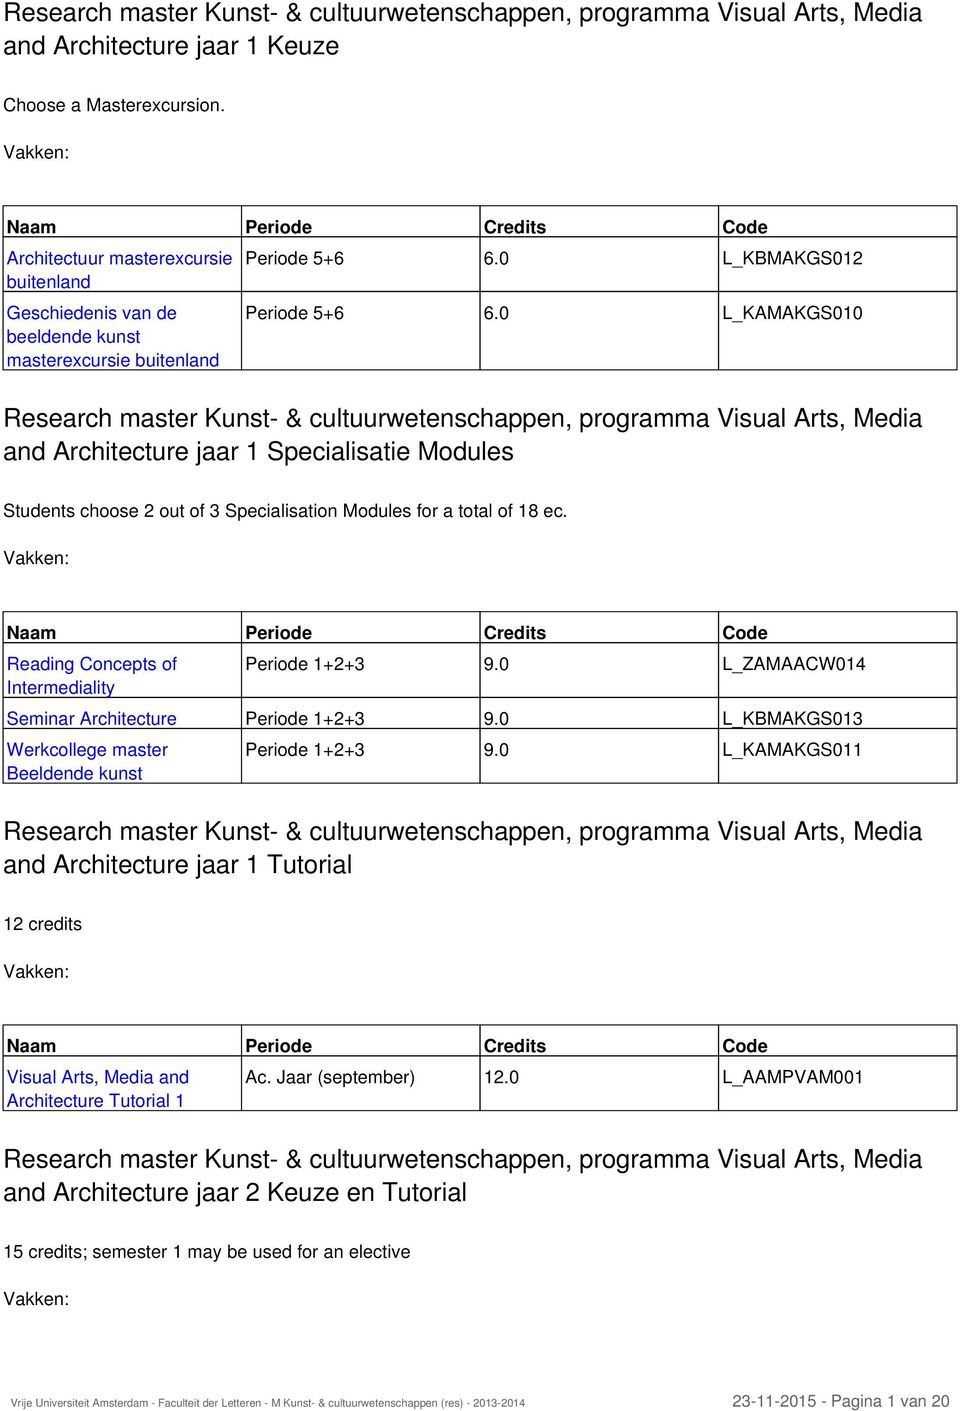 0 L_KAMAKGS010 Research master Kunst- & cultuurwetenschappen, programma Visual Arts, Media and Architecture jaar 1 Specialisatie Modules Students choose 2 out of 3 Specialisation Modules for a total